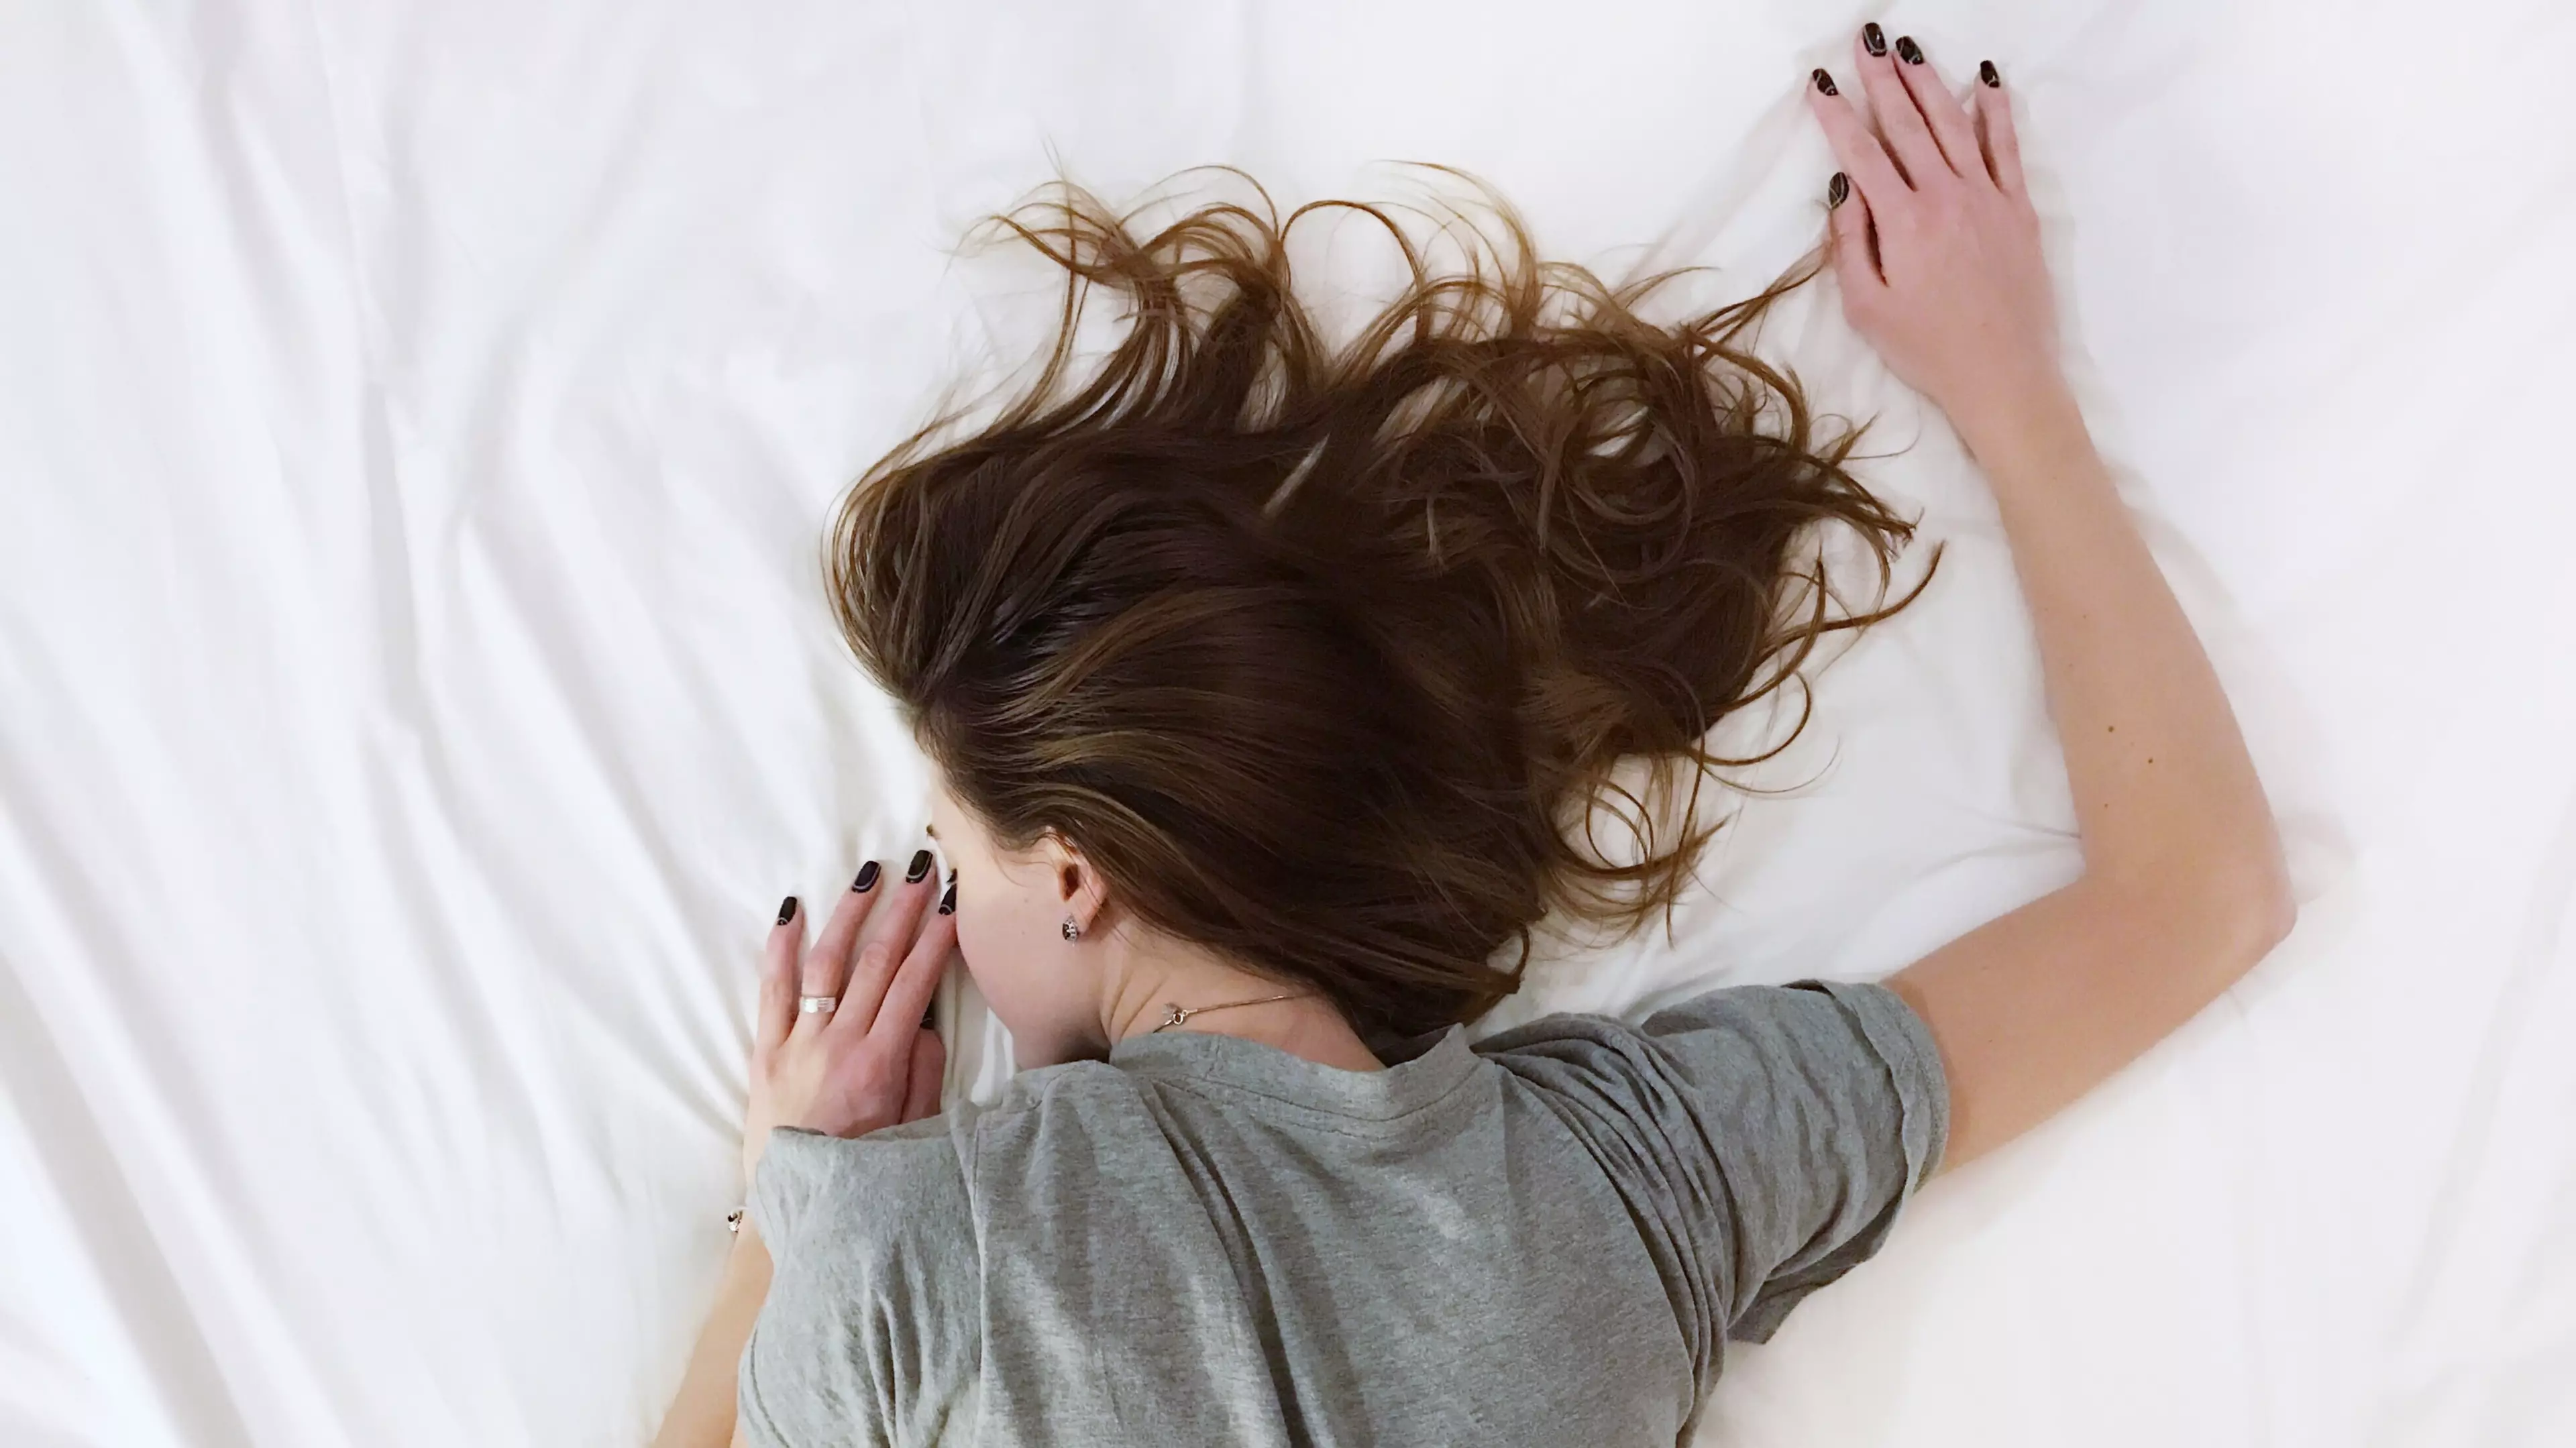 Waking Up To The 'Harsh Beeping' Of An Alarm Can Make You More Groggy